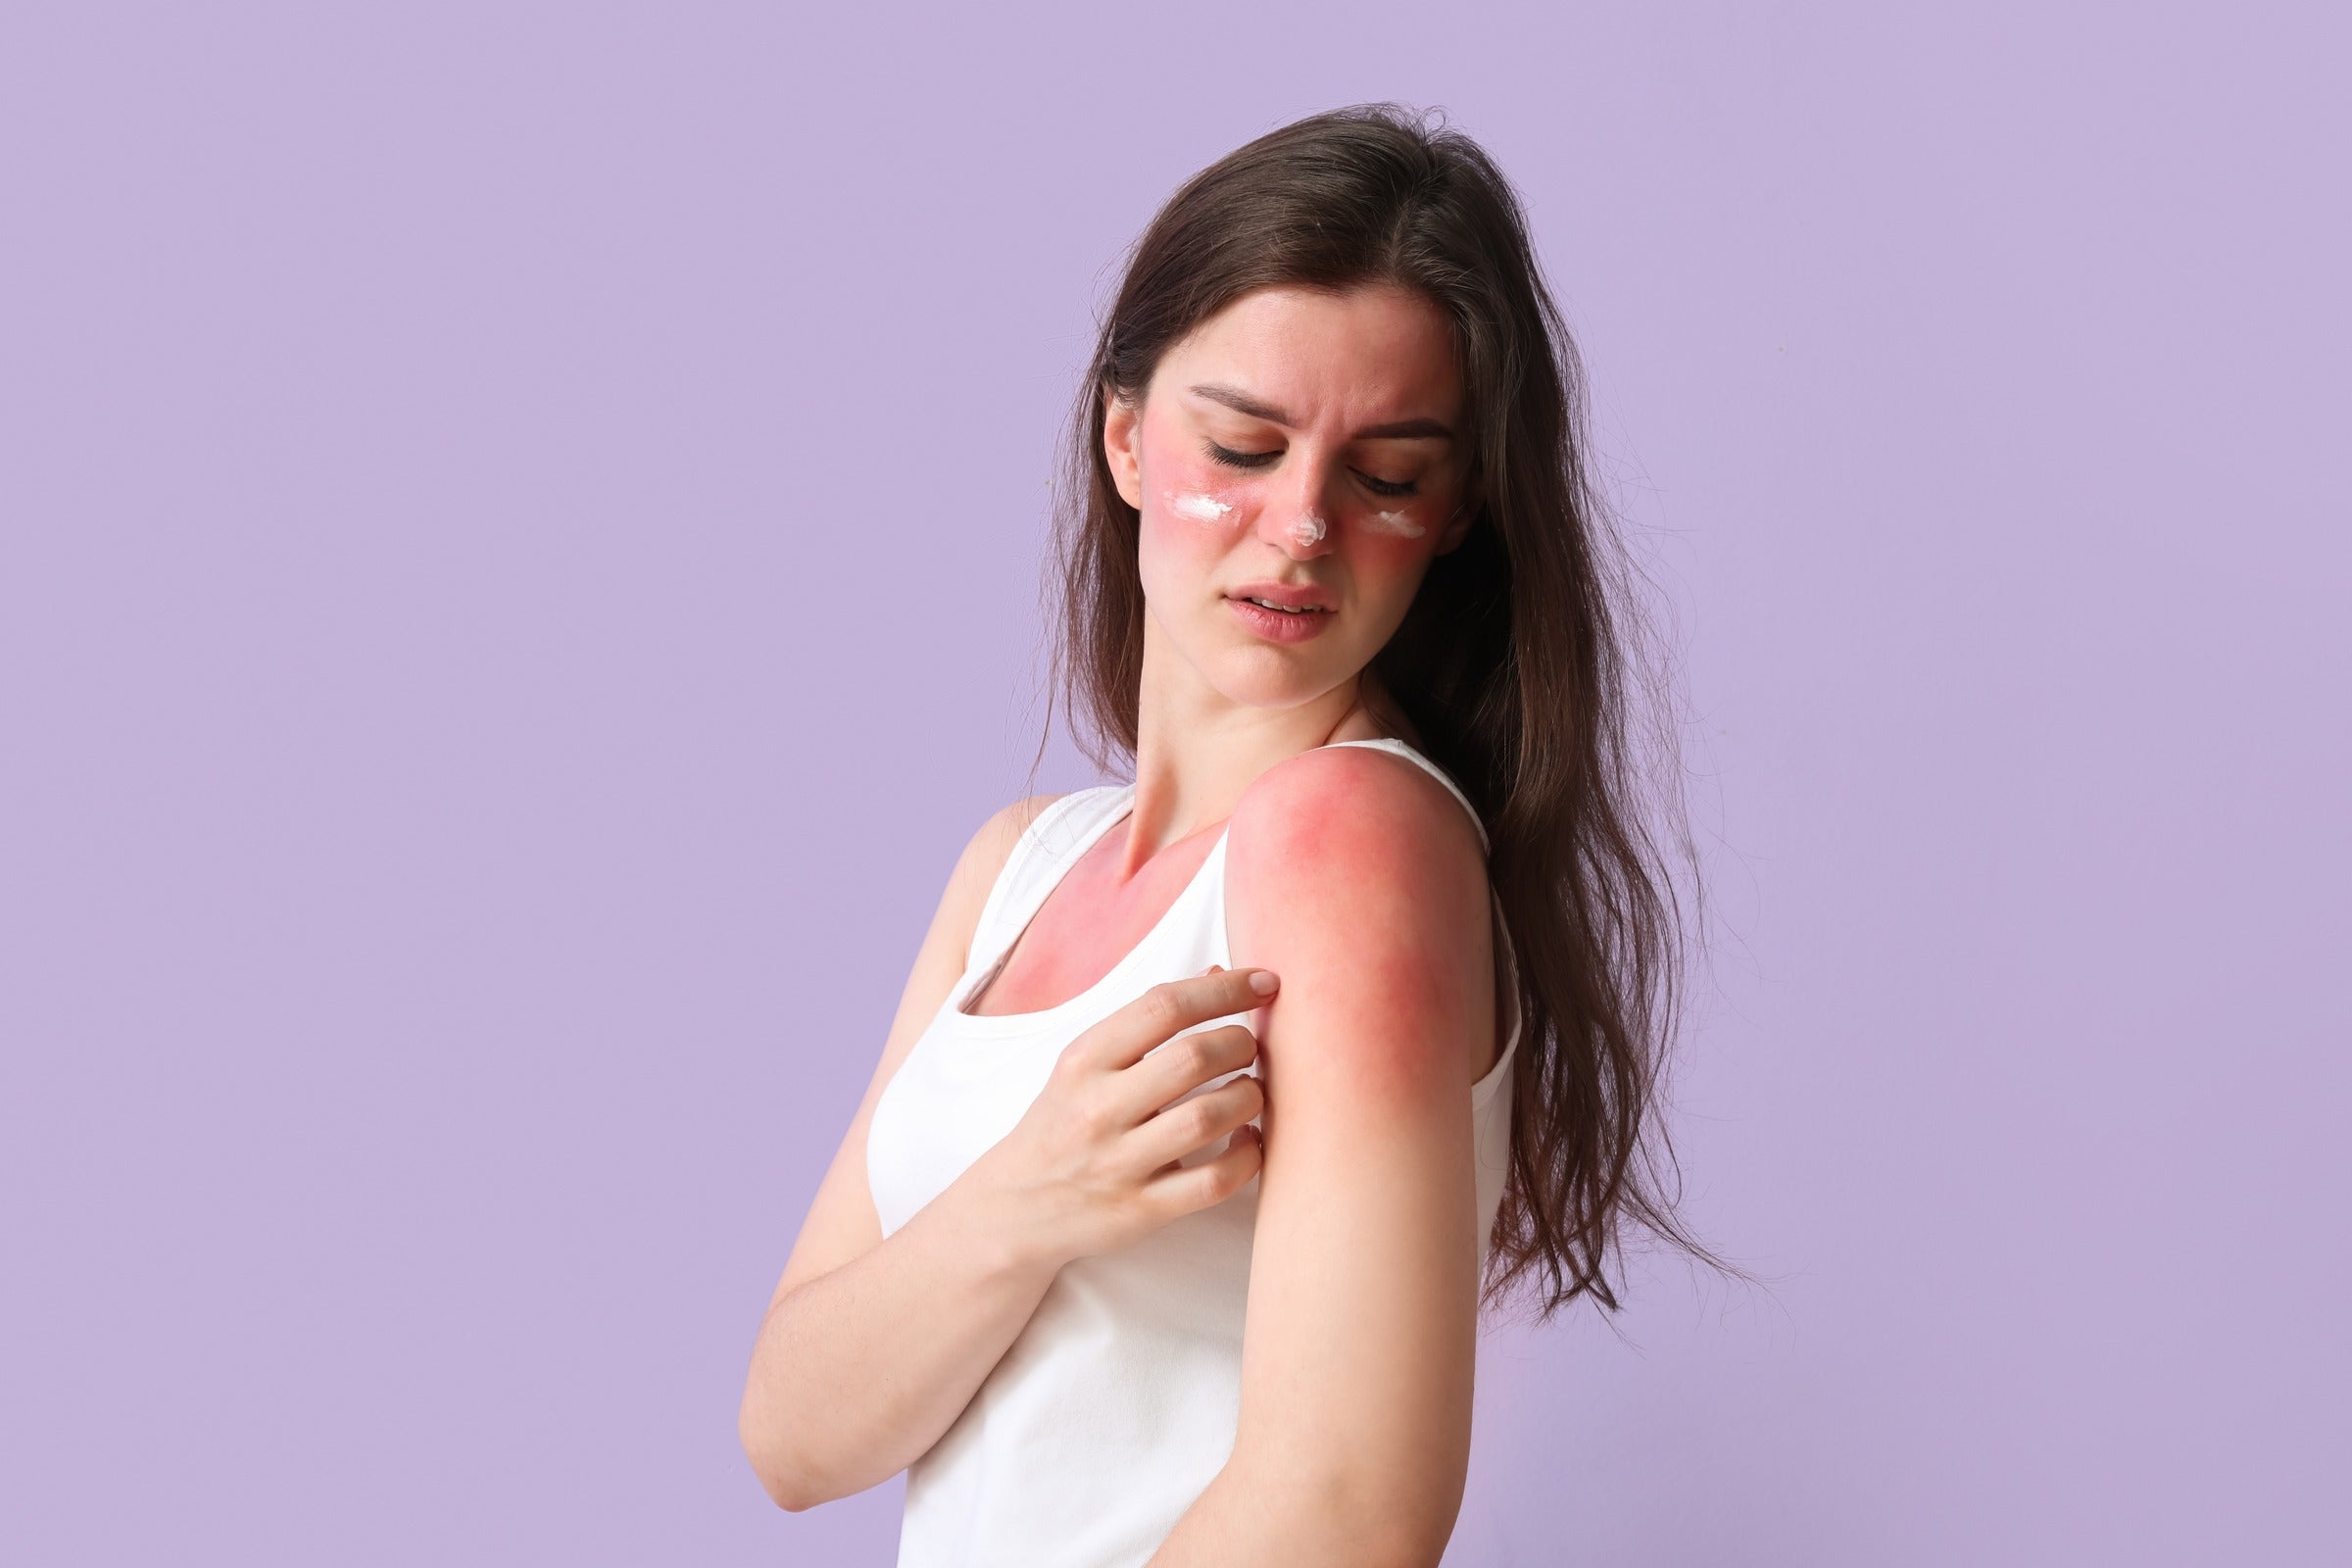 The location of allergies and burning skin